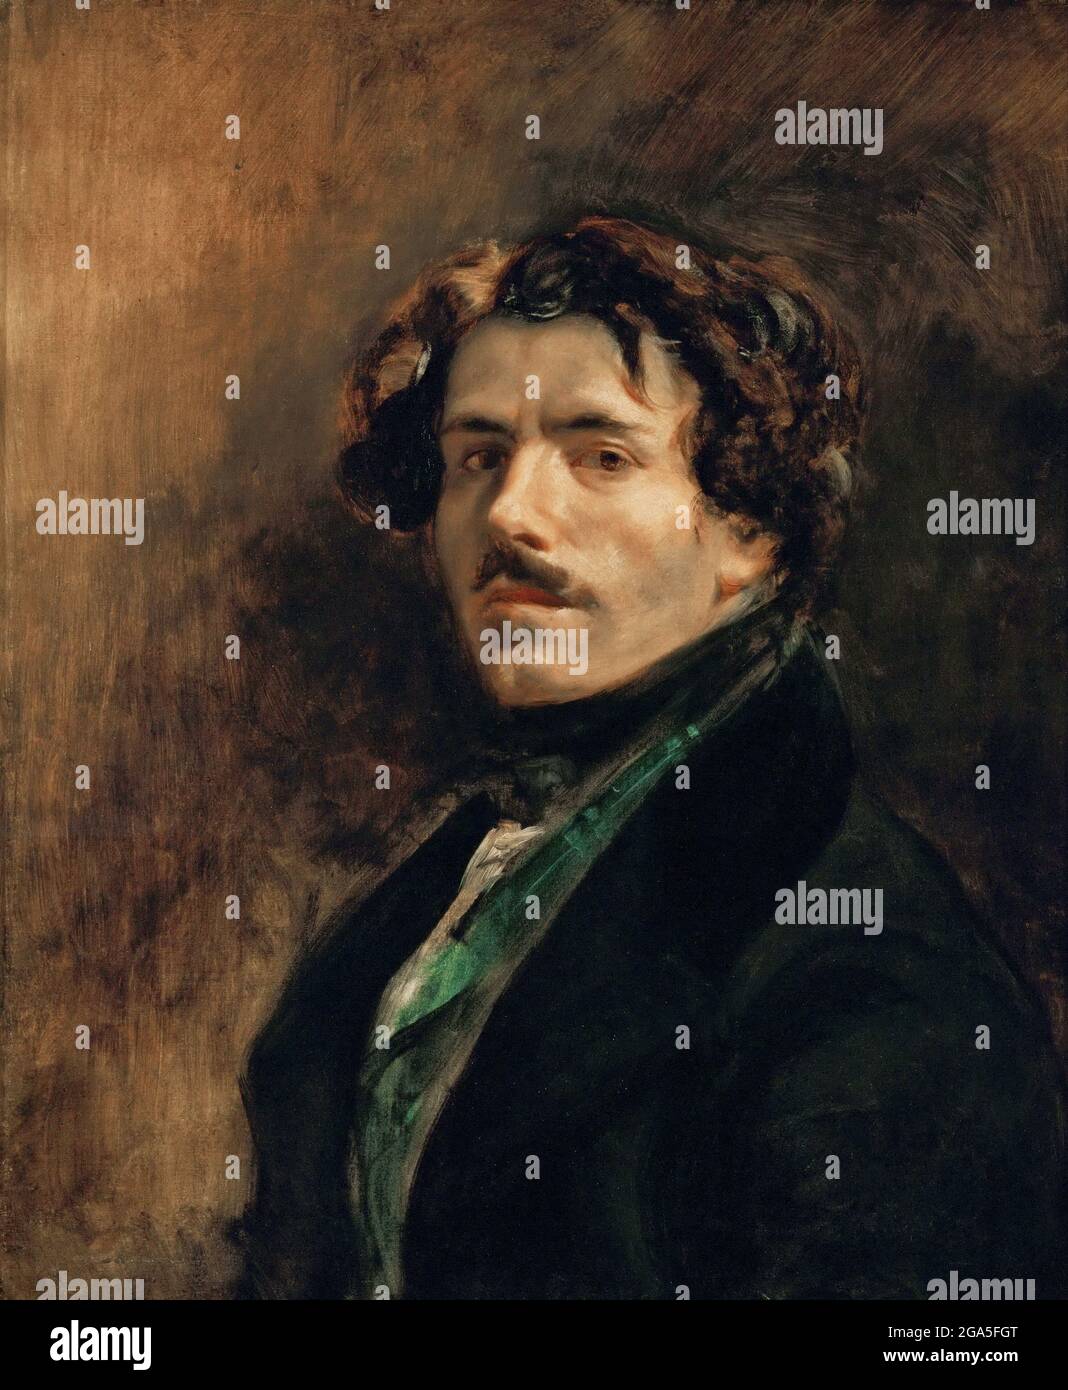 France: Eugène Delacroix (1798 – 1863), Self-portrait, 1837. Ferdinand Victor Eugène Delacroix (26 April 1798 – 13 August 1863) was a French Romantic  artist regarded from the outset of his career as the leader of the French Romantic school. Delacroix's use of expressive brushstrokes and his study of the optical effects of colour profoundly shaped the work of the Impressionists, while his passion for the exotic inspired the artists of the Symbolist movement. Stock Photo